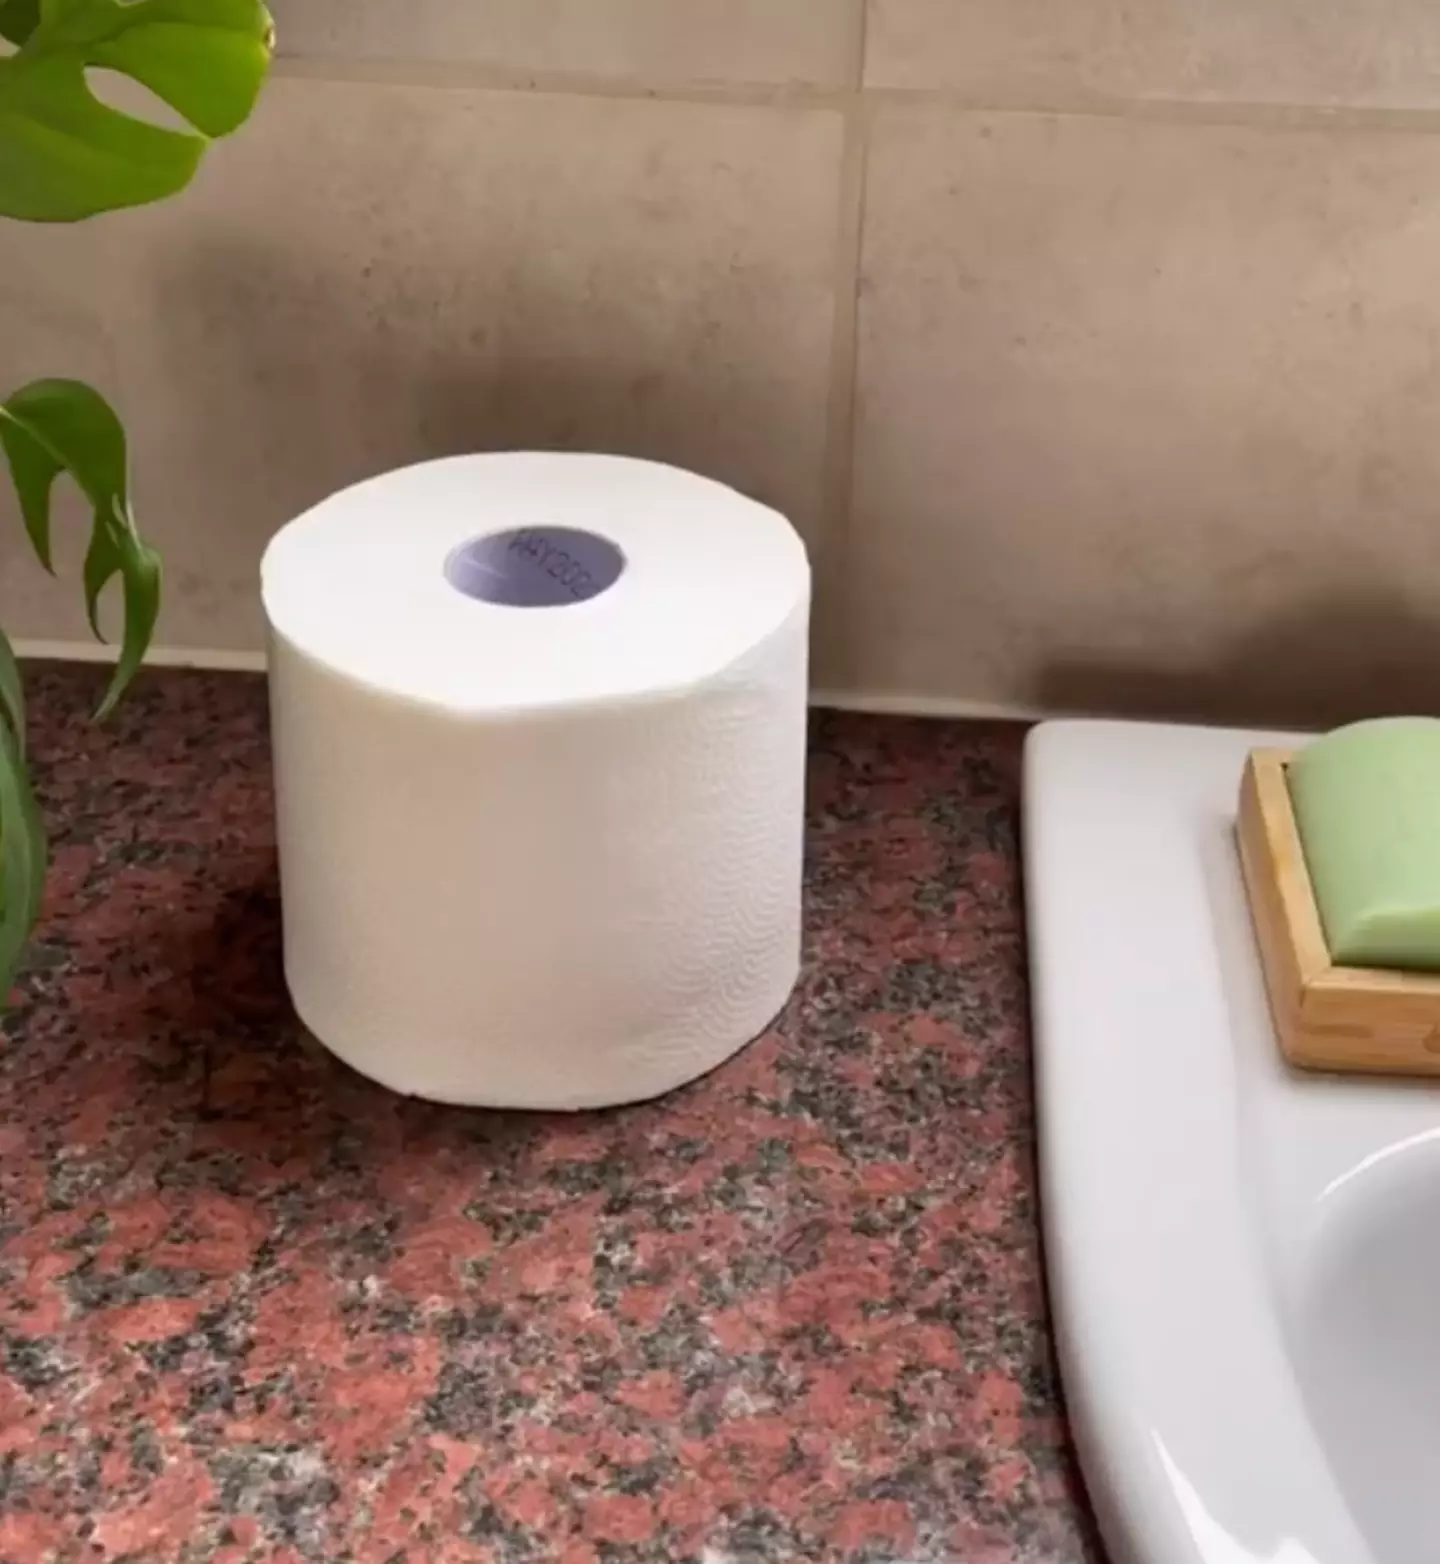 One mum revealed she saved £70 by simply switching from loo roll to resuable toilet paper.